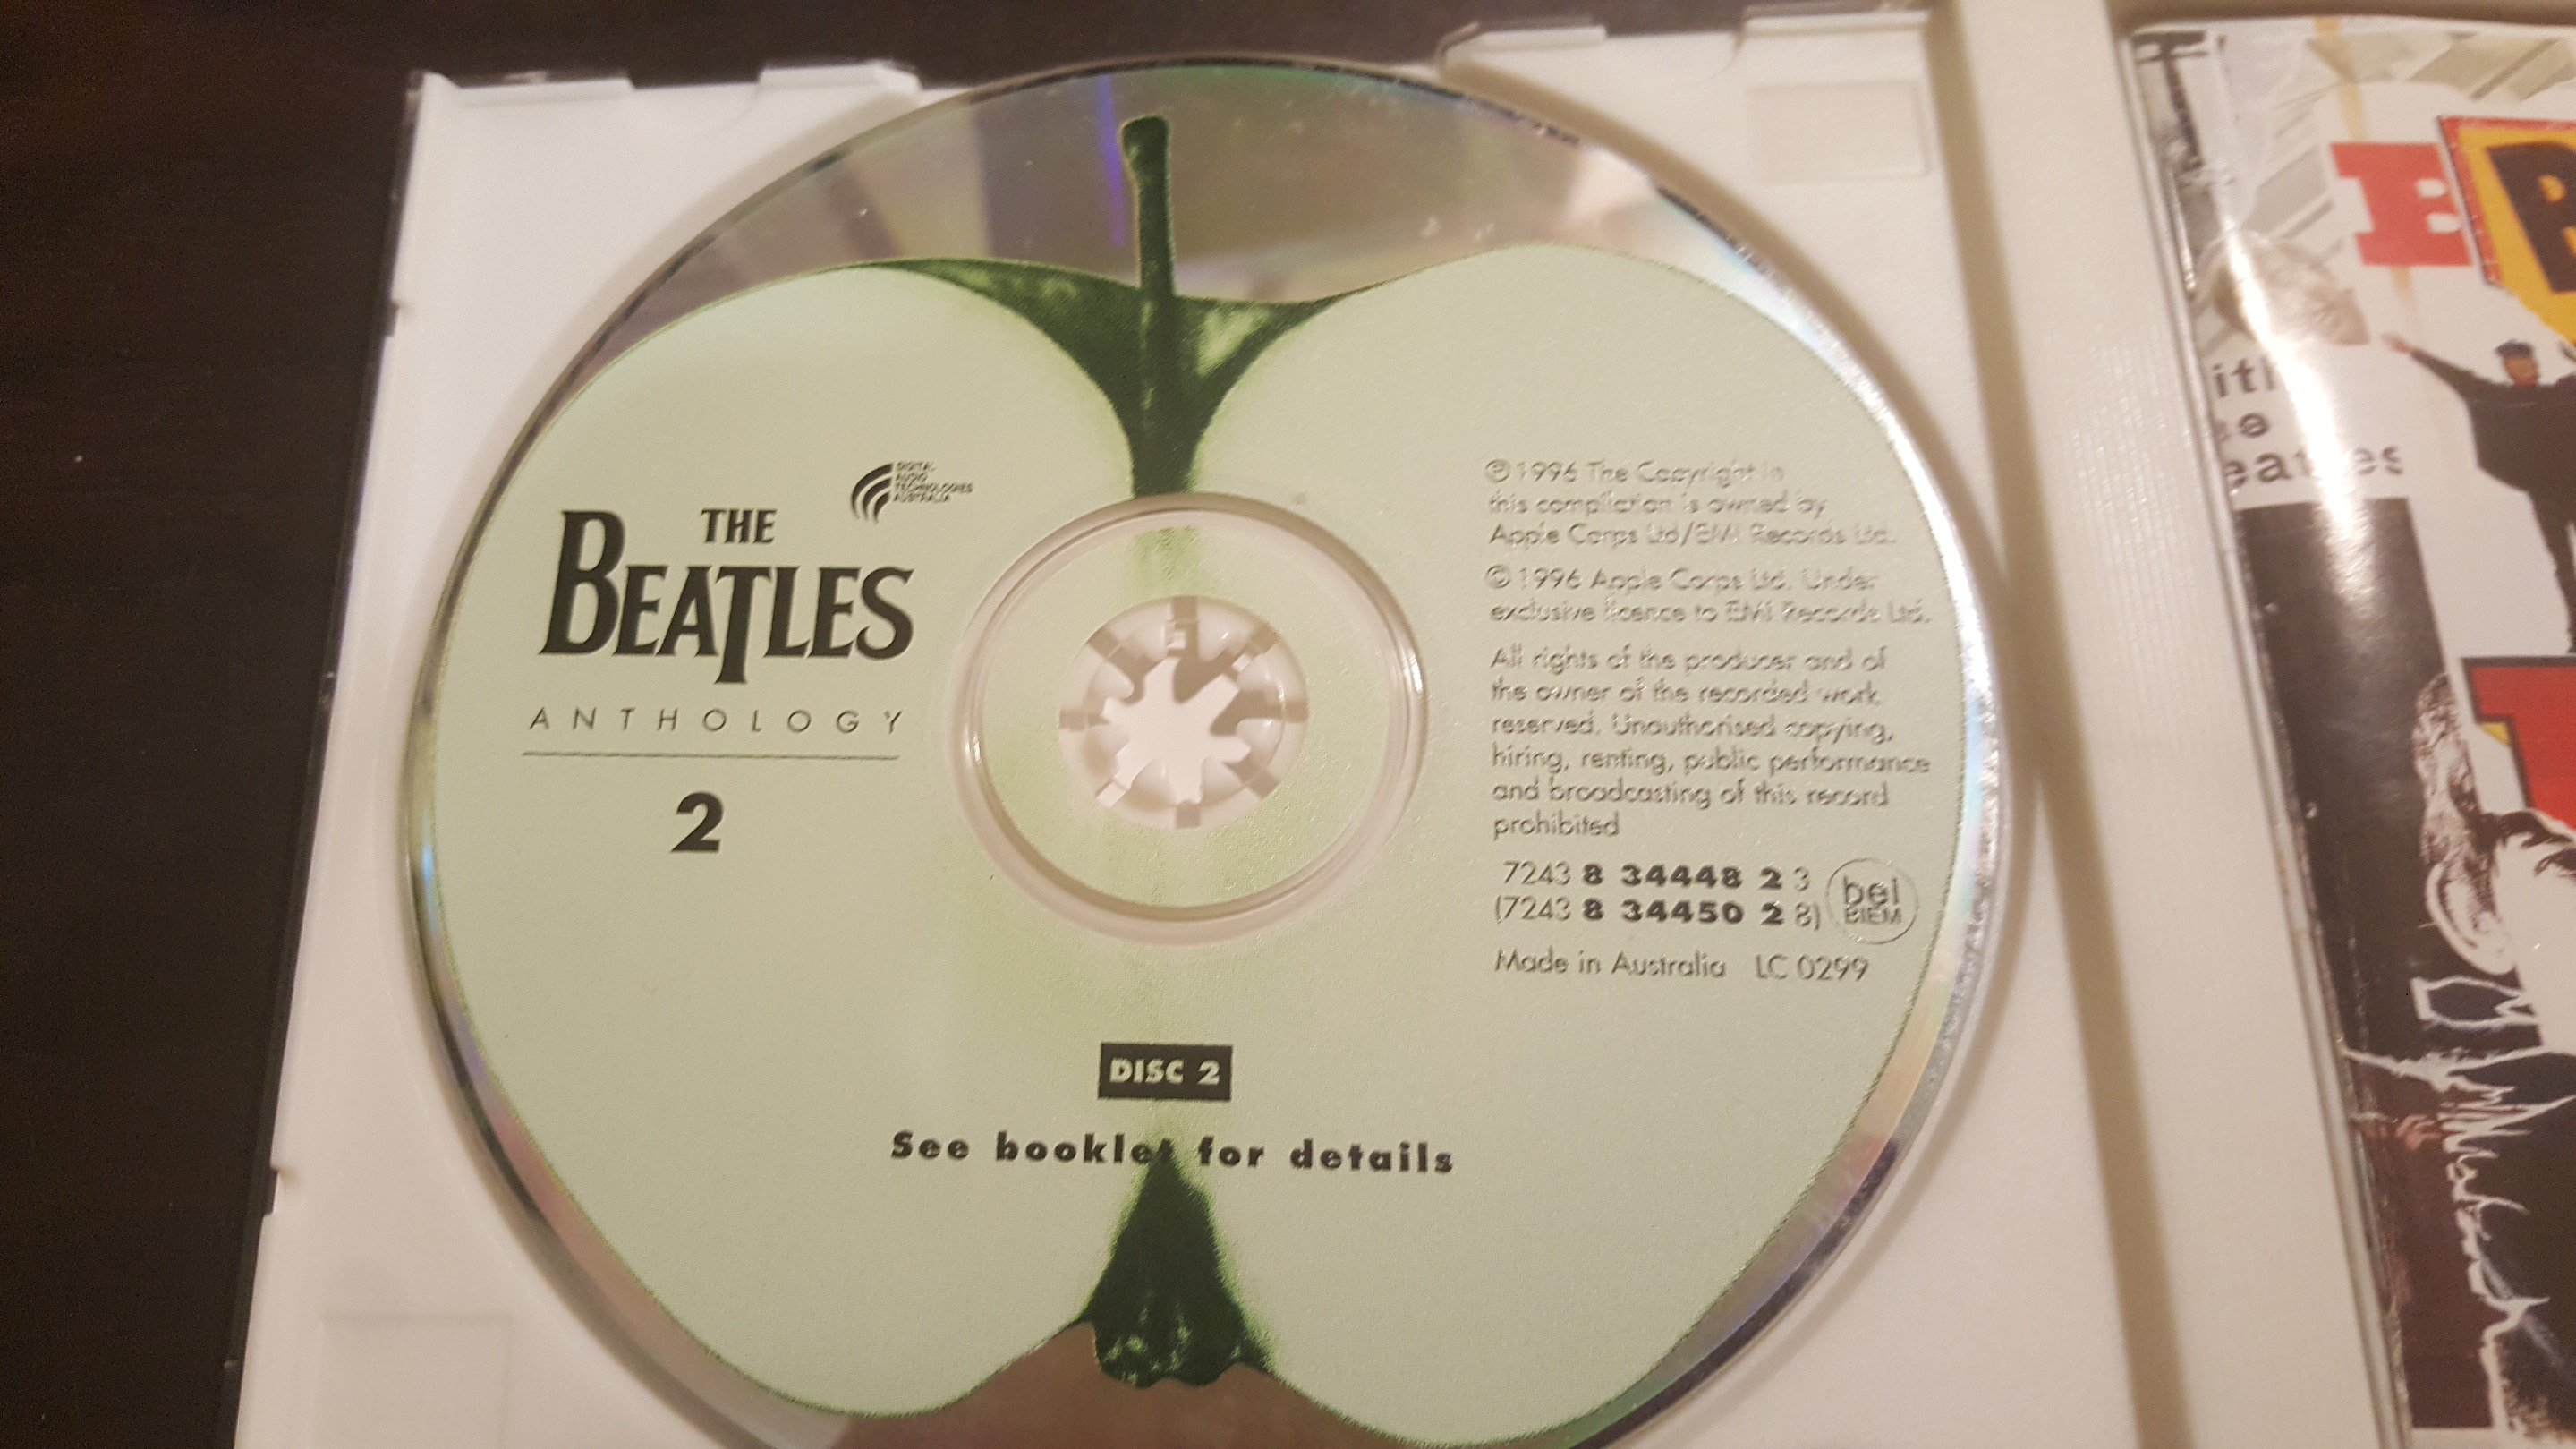 The Beatles Anthology Show at SHEA Stadium 2 Excellent CDS New